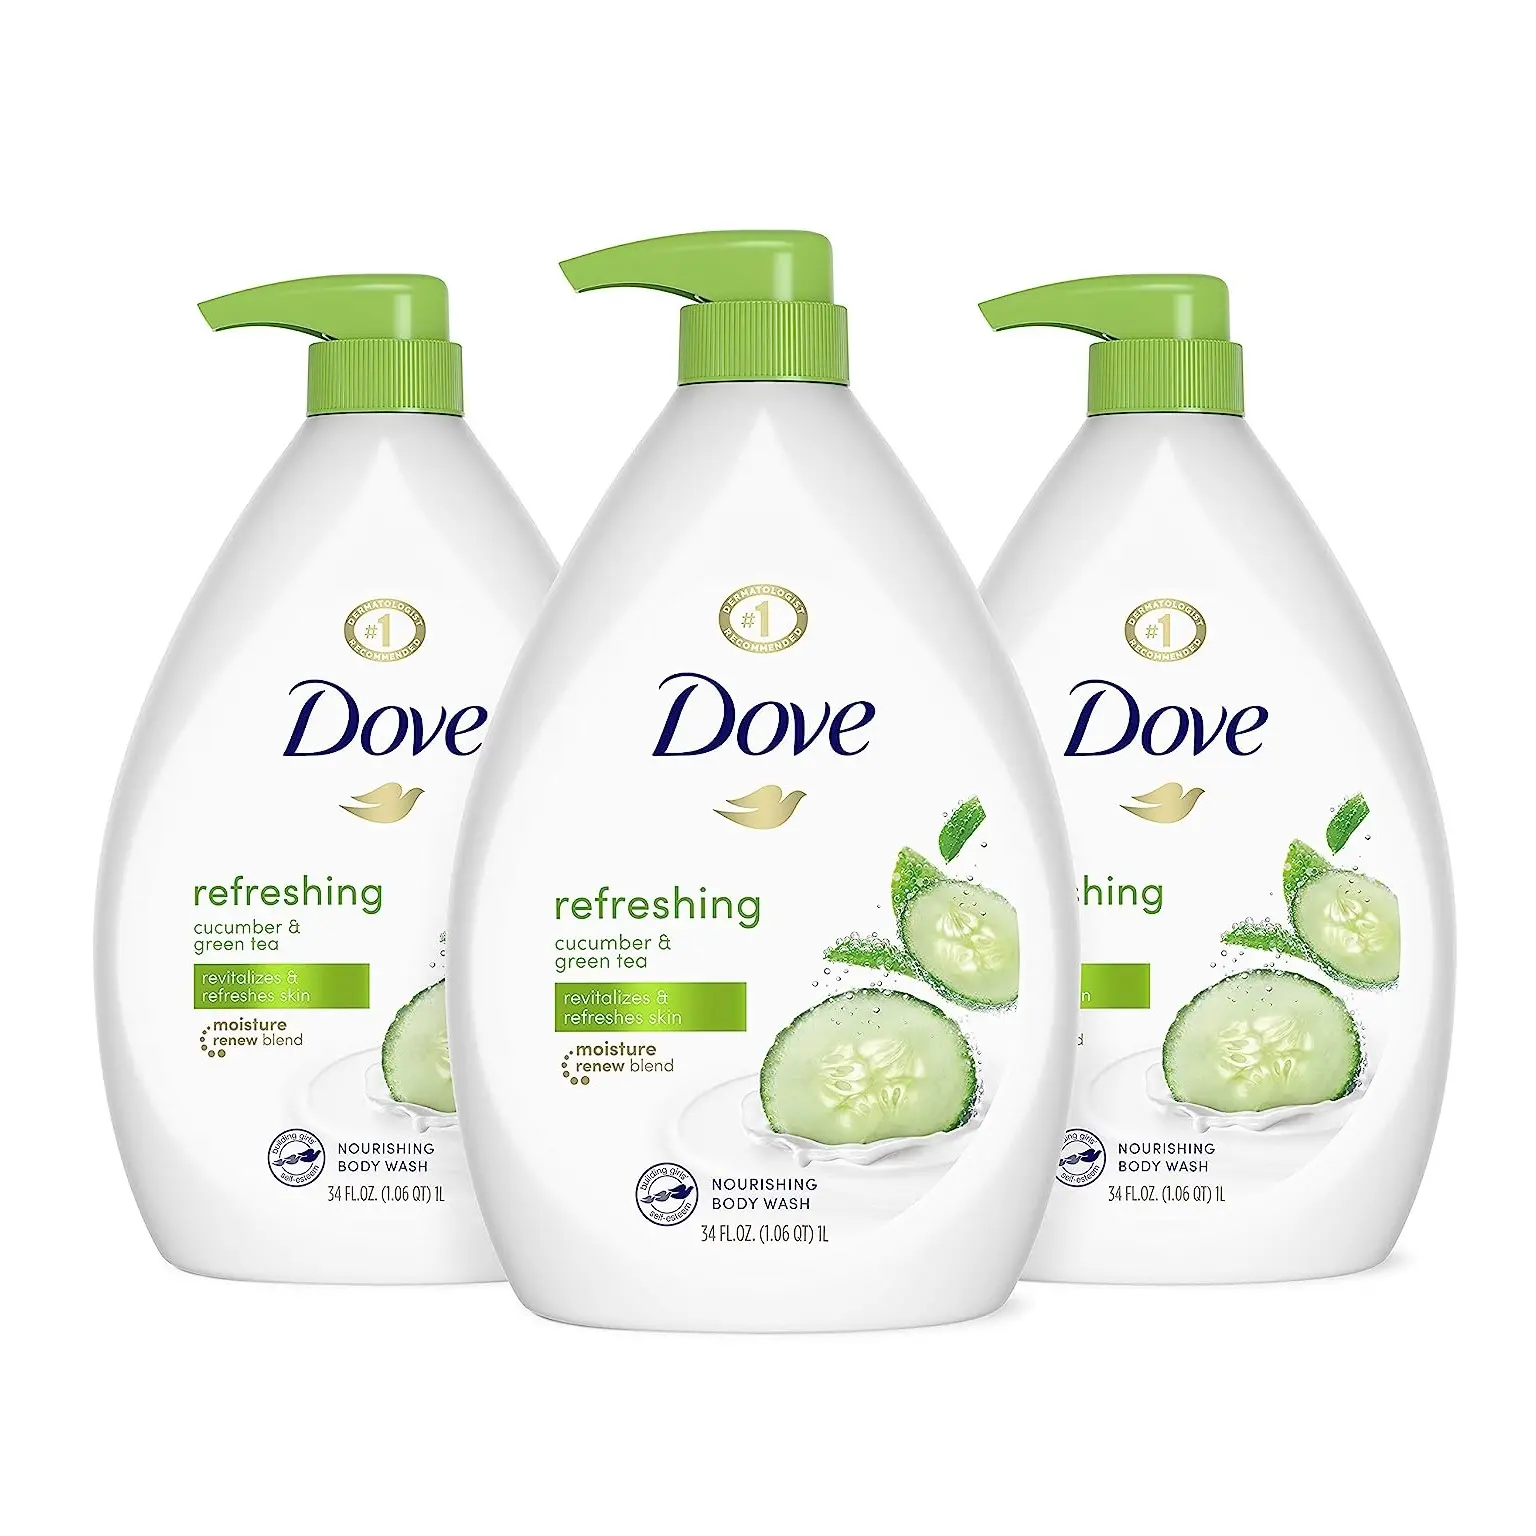 Dove Refreshing Body Wash with Pump Revitalizes and Refreshes Skin Cucumber and Green Tea Effectively Washes